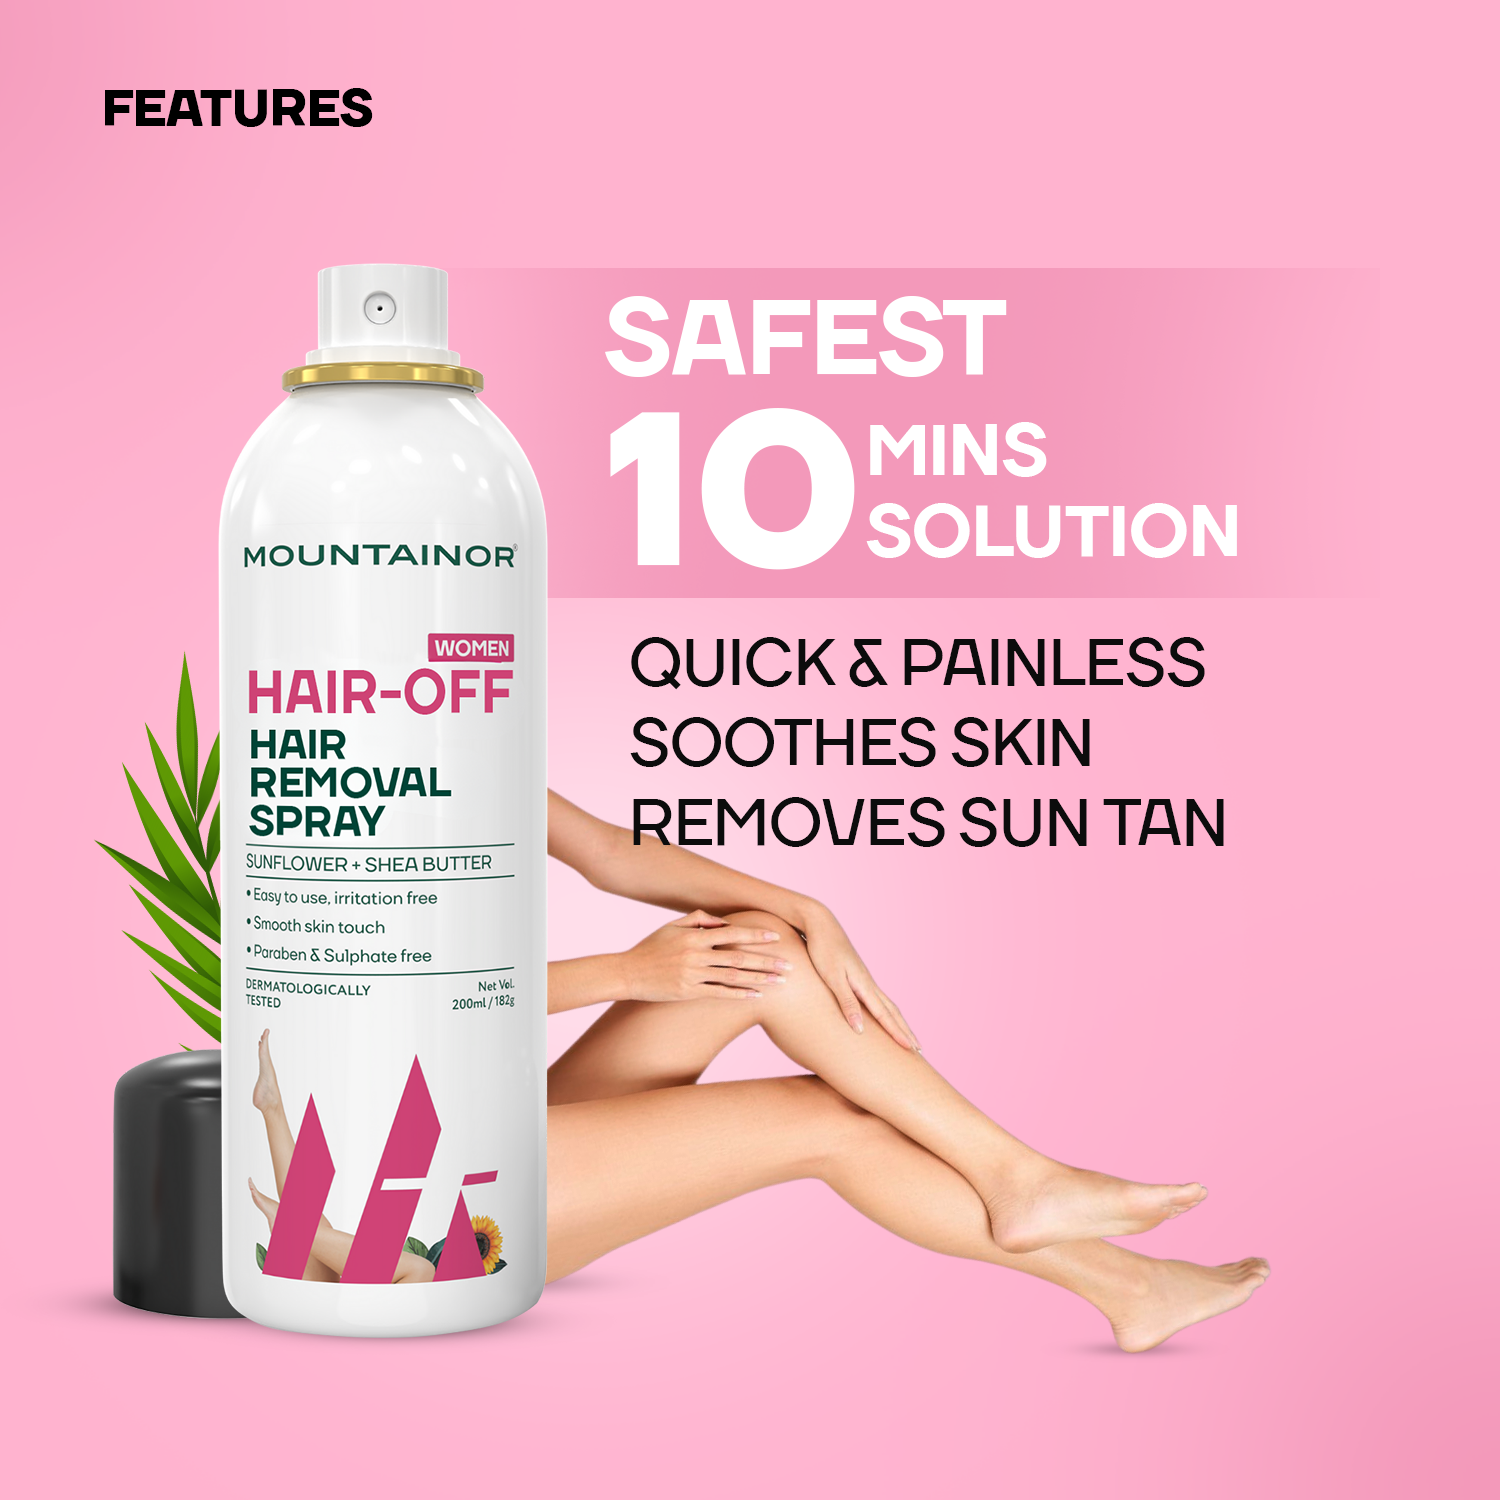 Hair Removal Spray for Women💃🏻✨ | Painless & Fast-Acting Body Hair Solution🌻 - 200ml